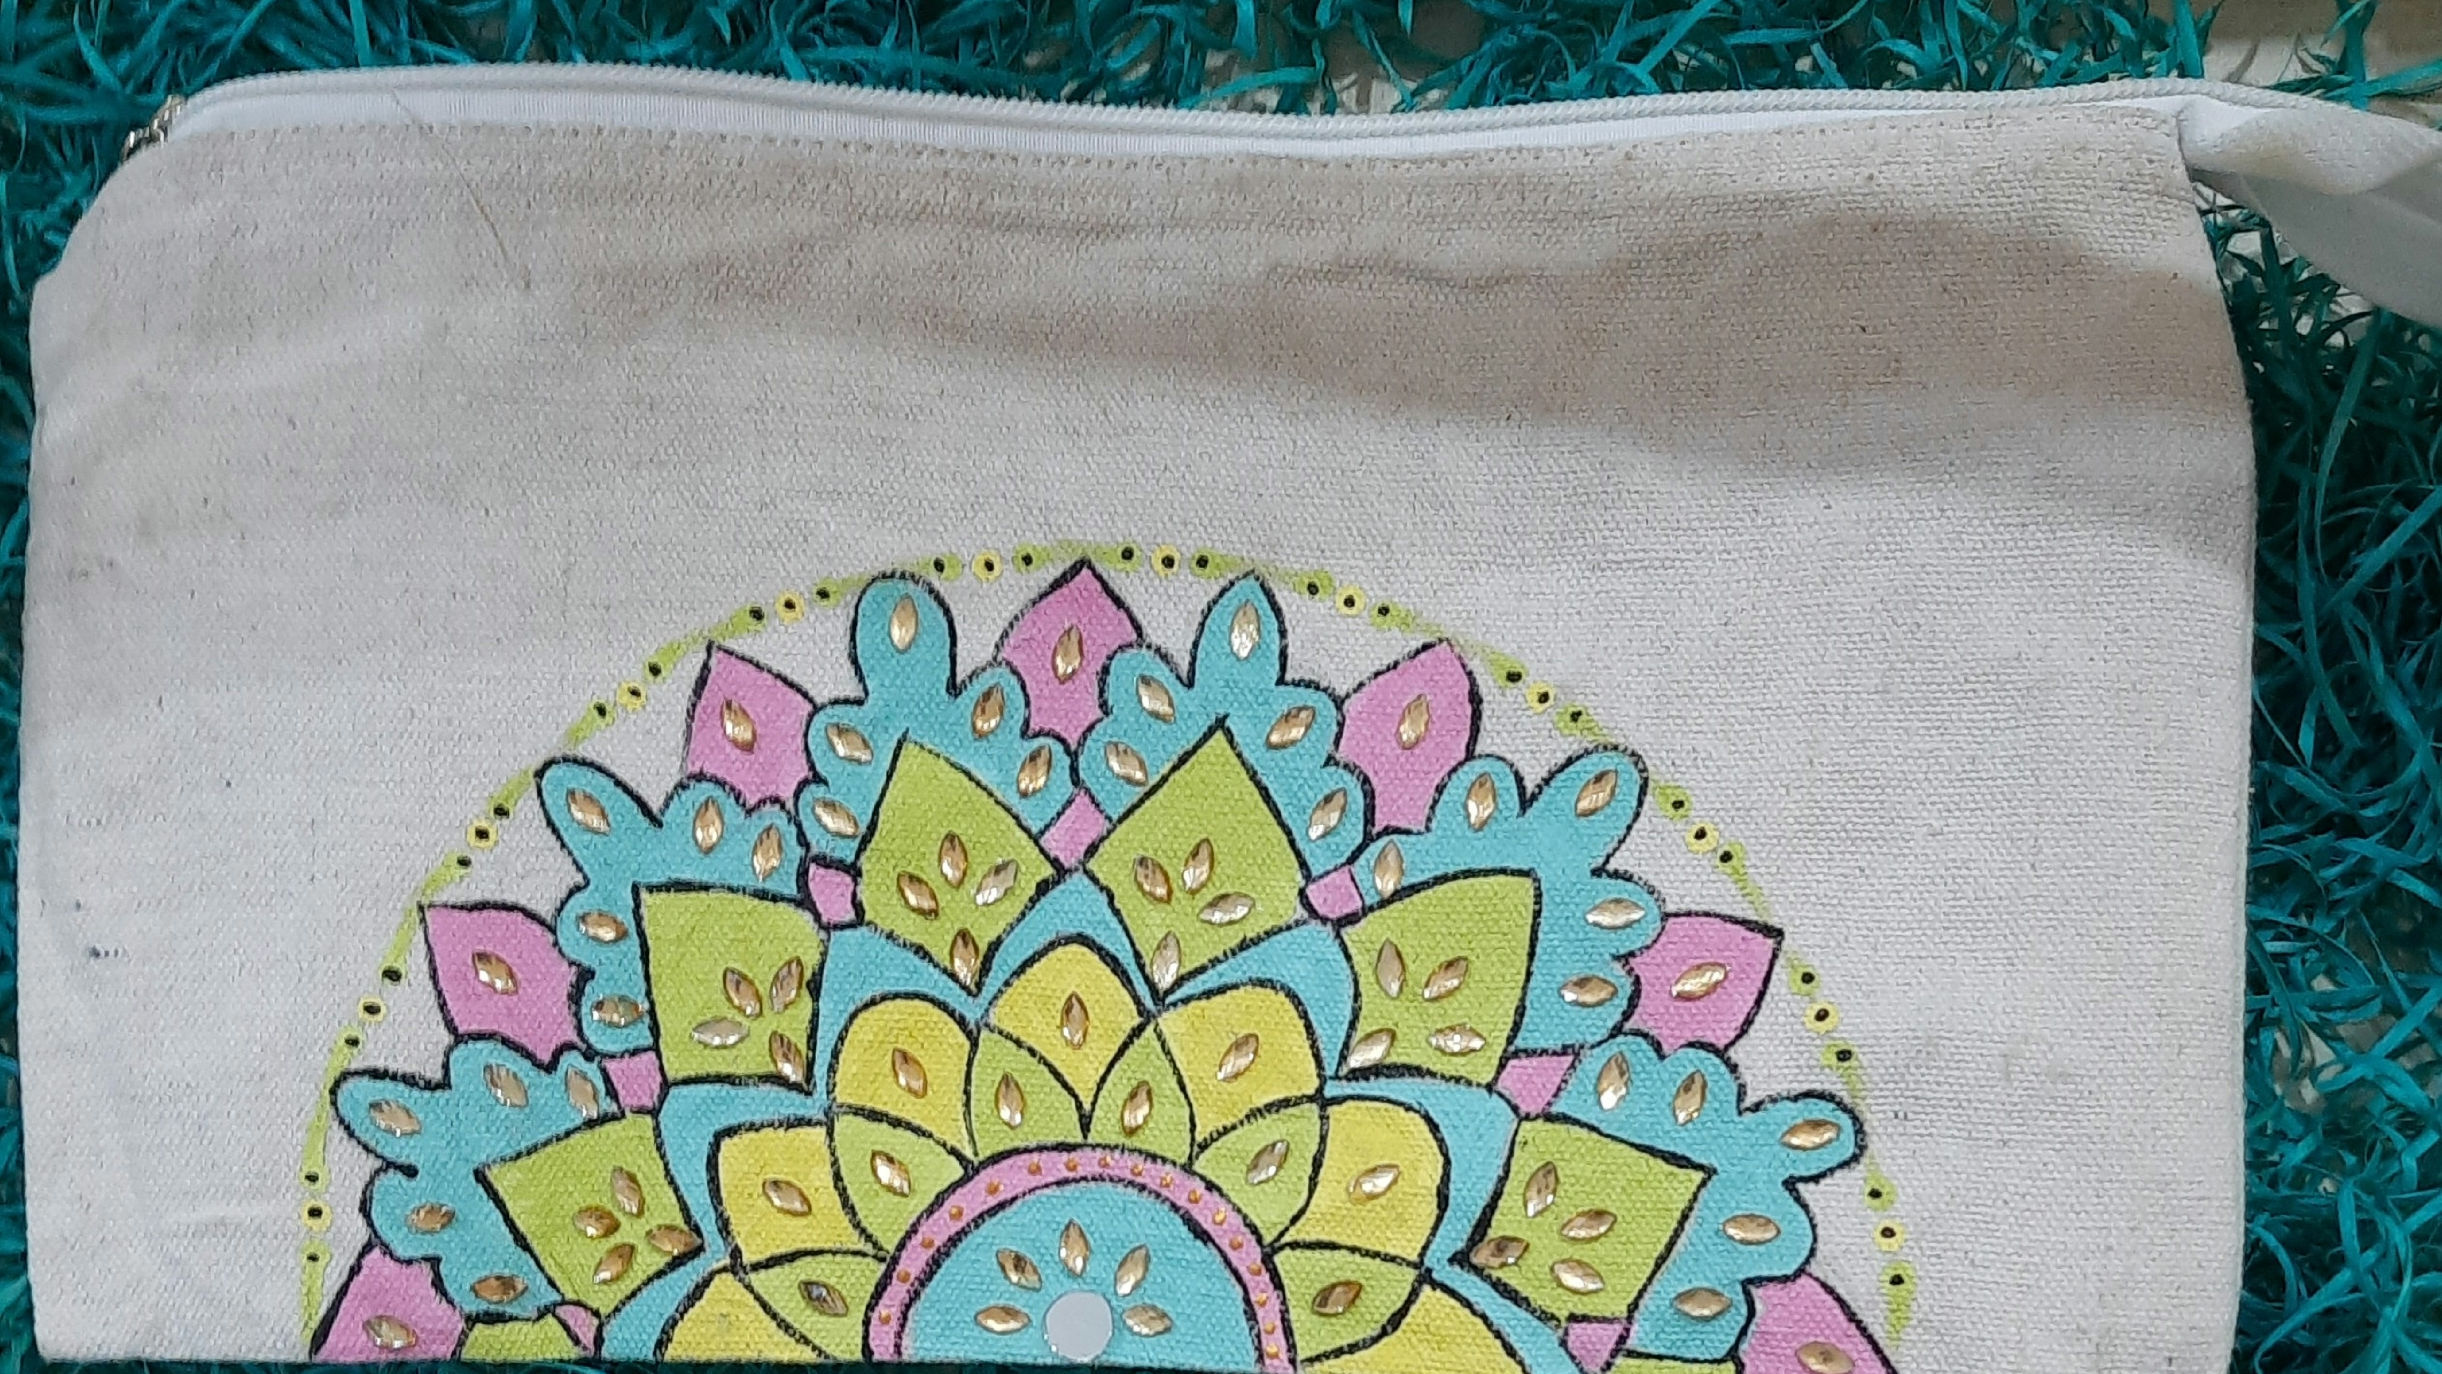 multipurpose pouch ,can be customized, minimum order 6 pieces.
for enquiry send message.